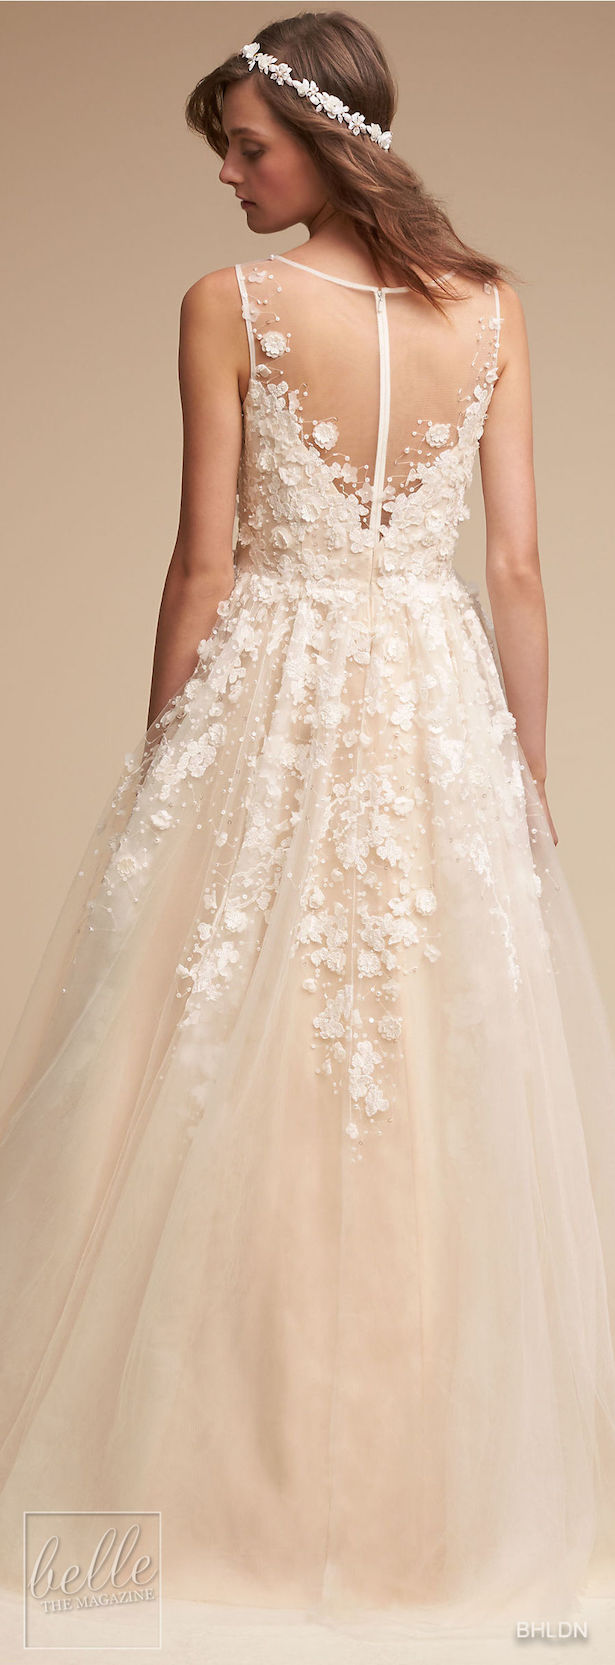 Our Favorite Wedding Dresses from BHLDN - Belle The Magazine